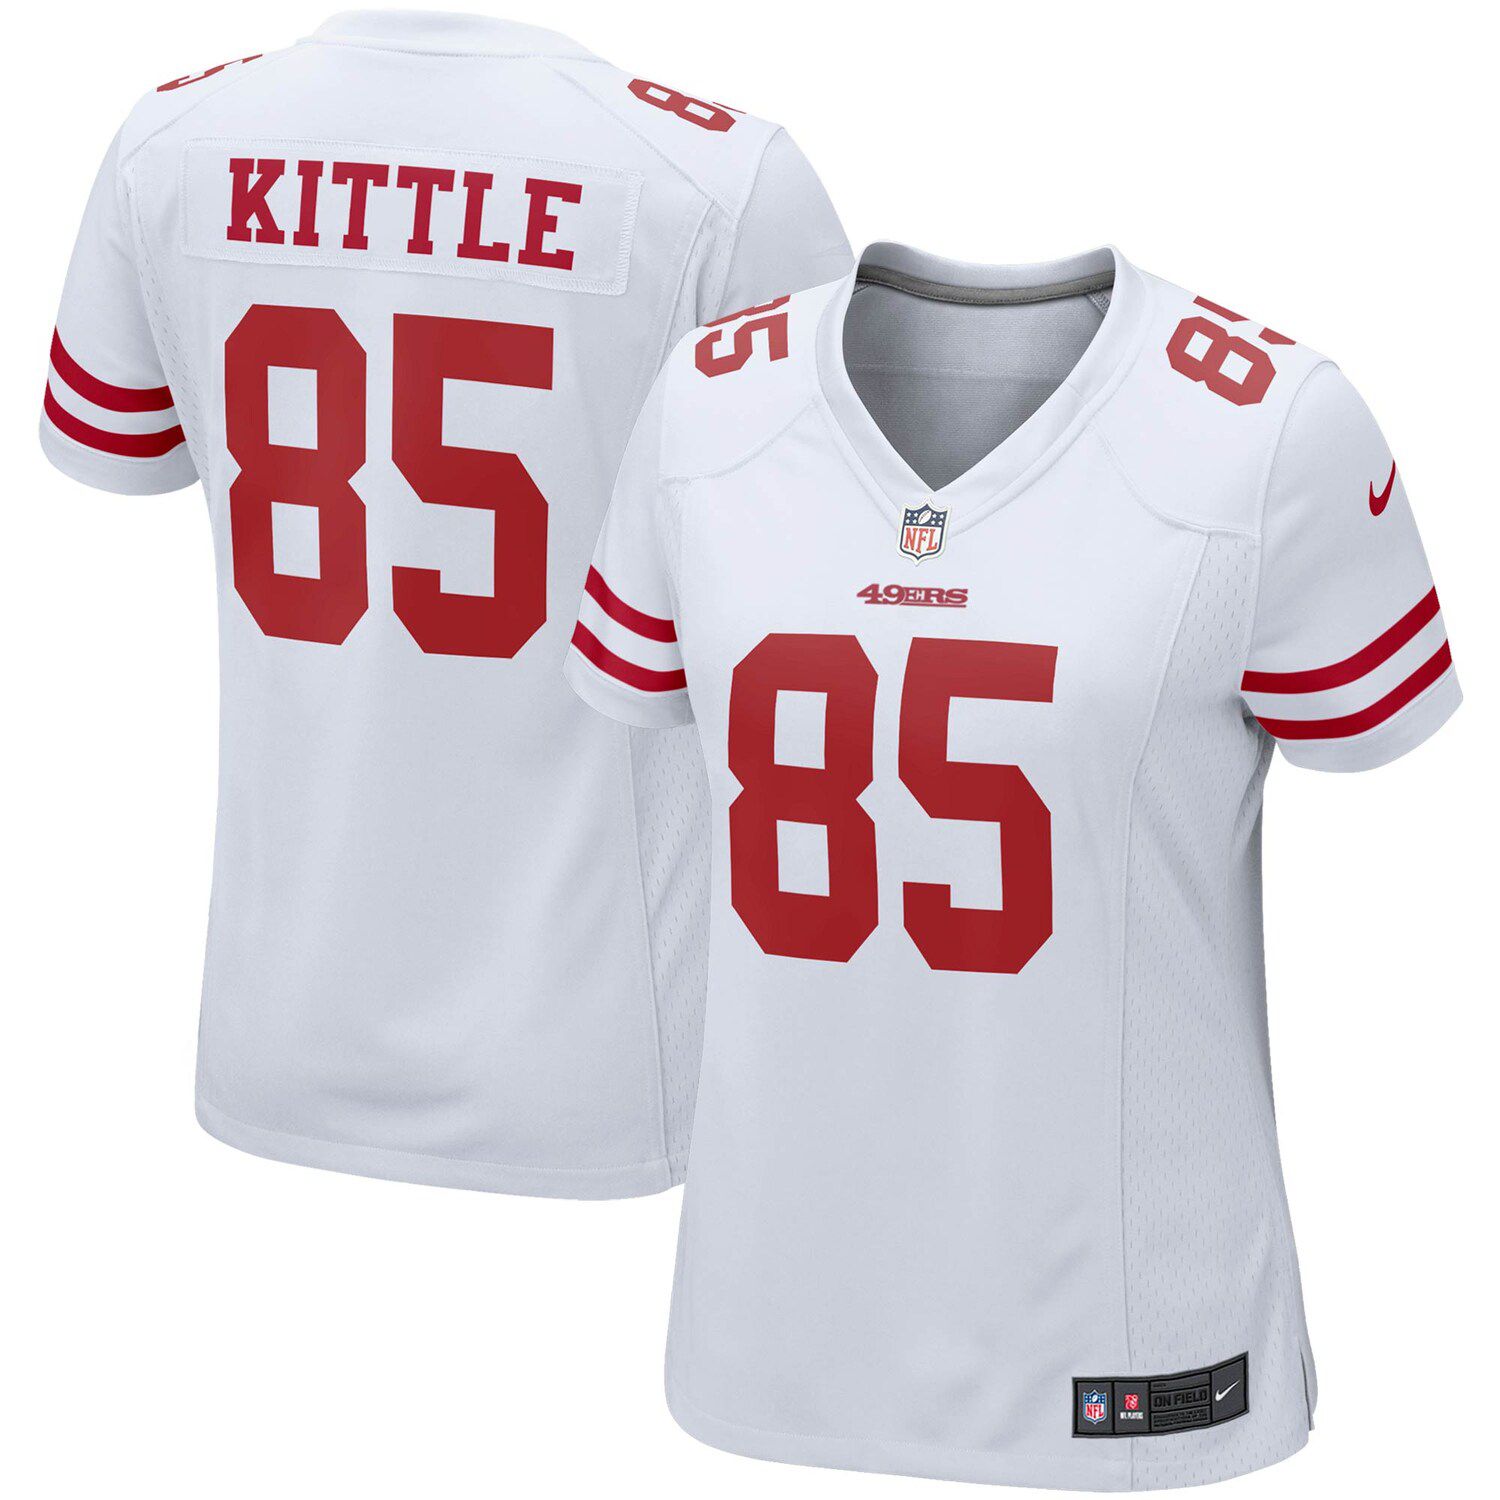 george kittle jersey white